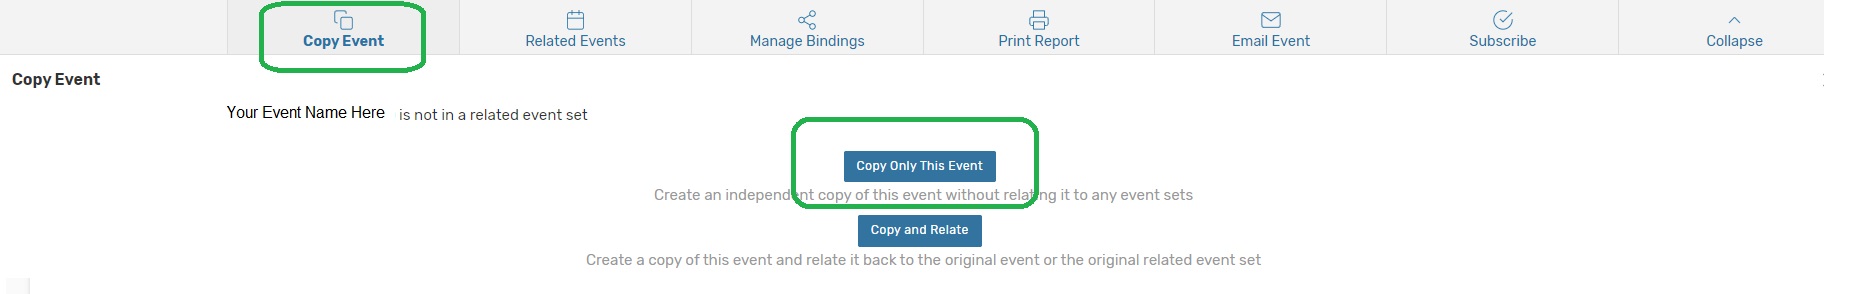 Selecting More Options, selecting Copy Event, and selecting Copy Only This Event.